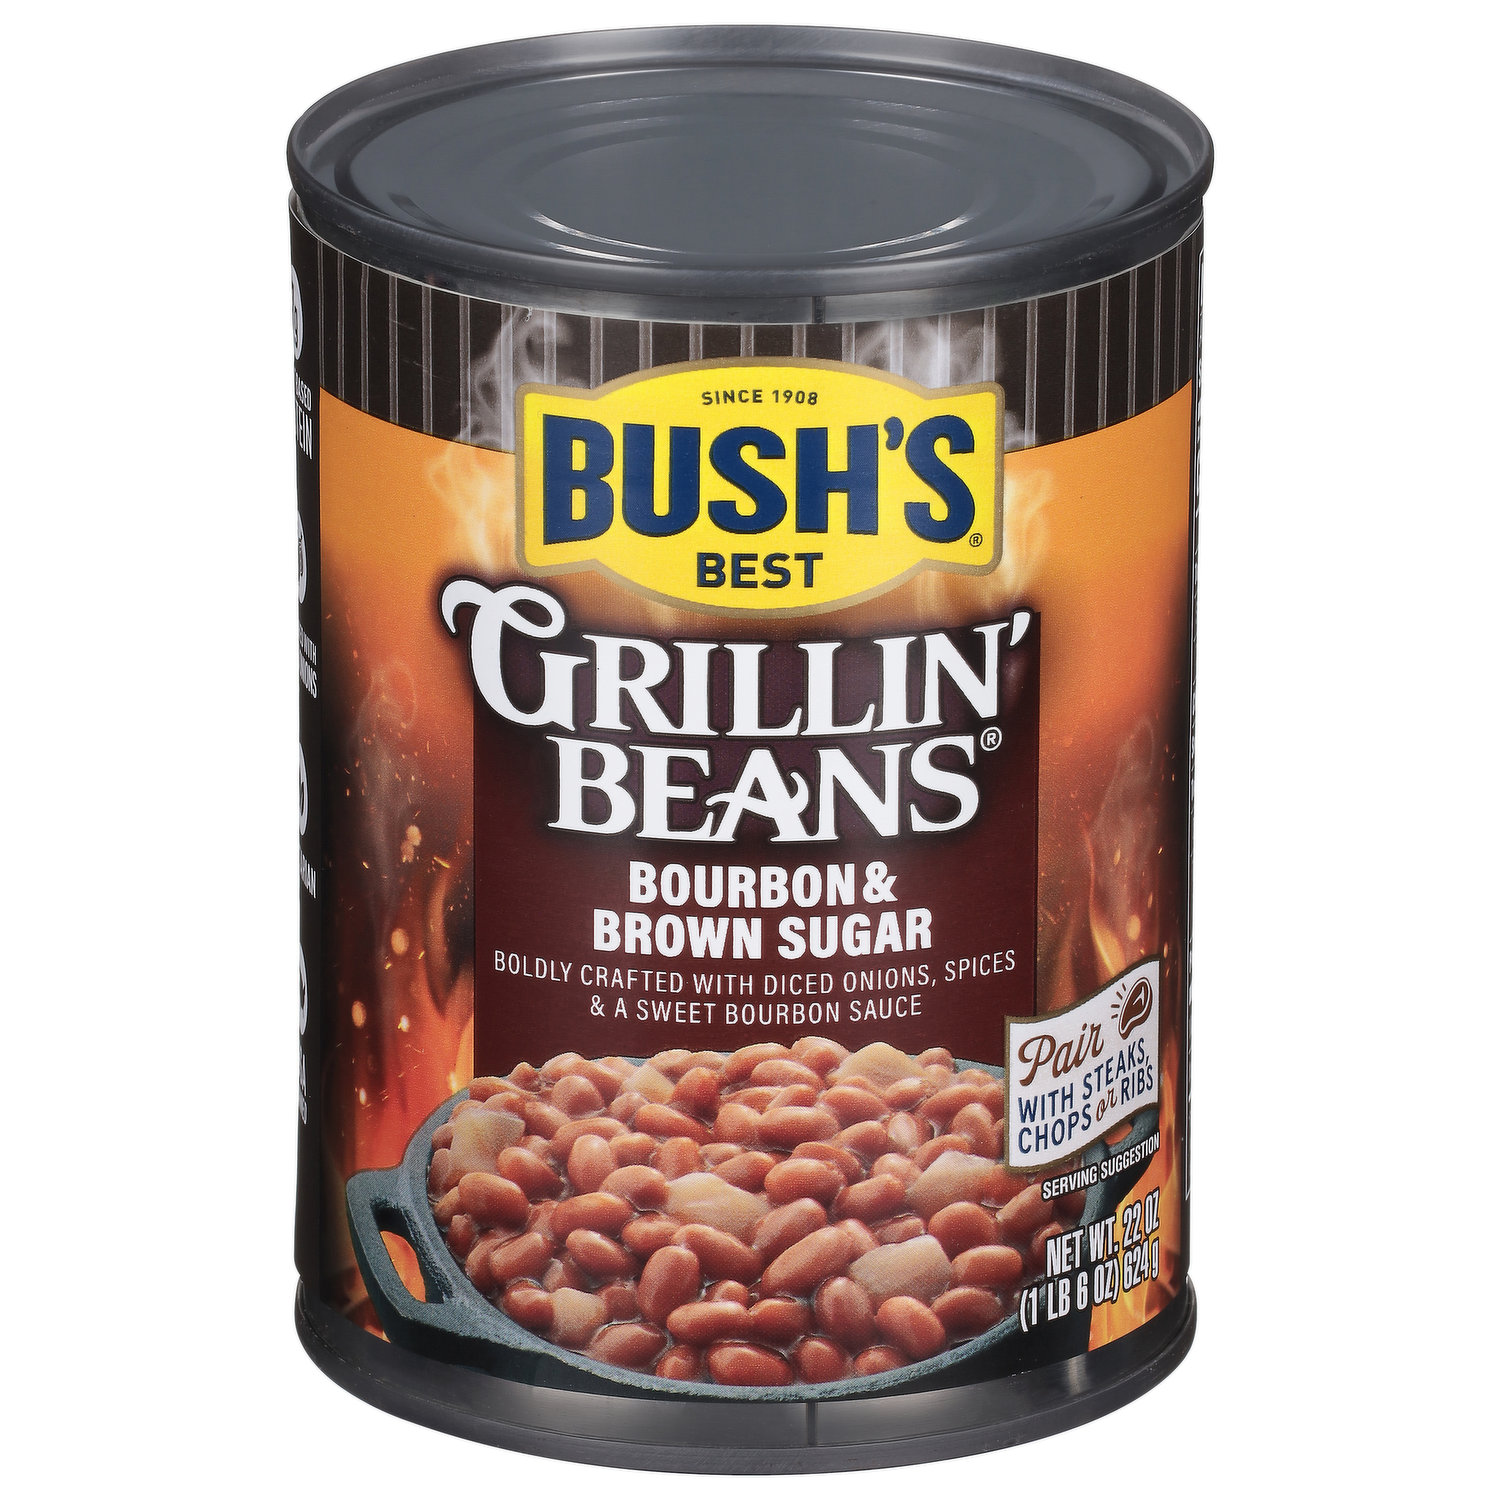 Solved: A half-cup serving of Bush's Vegetarian Baked Beans